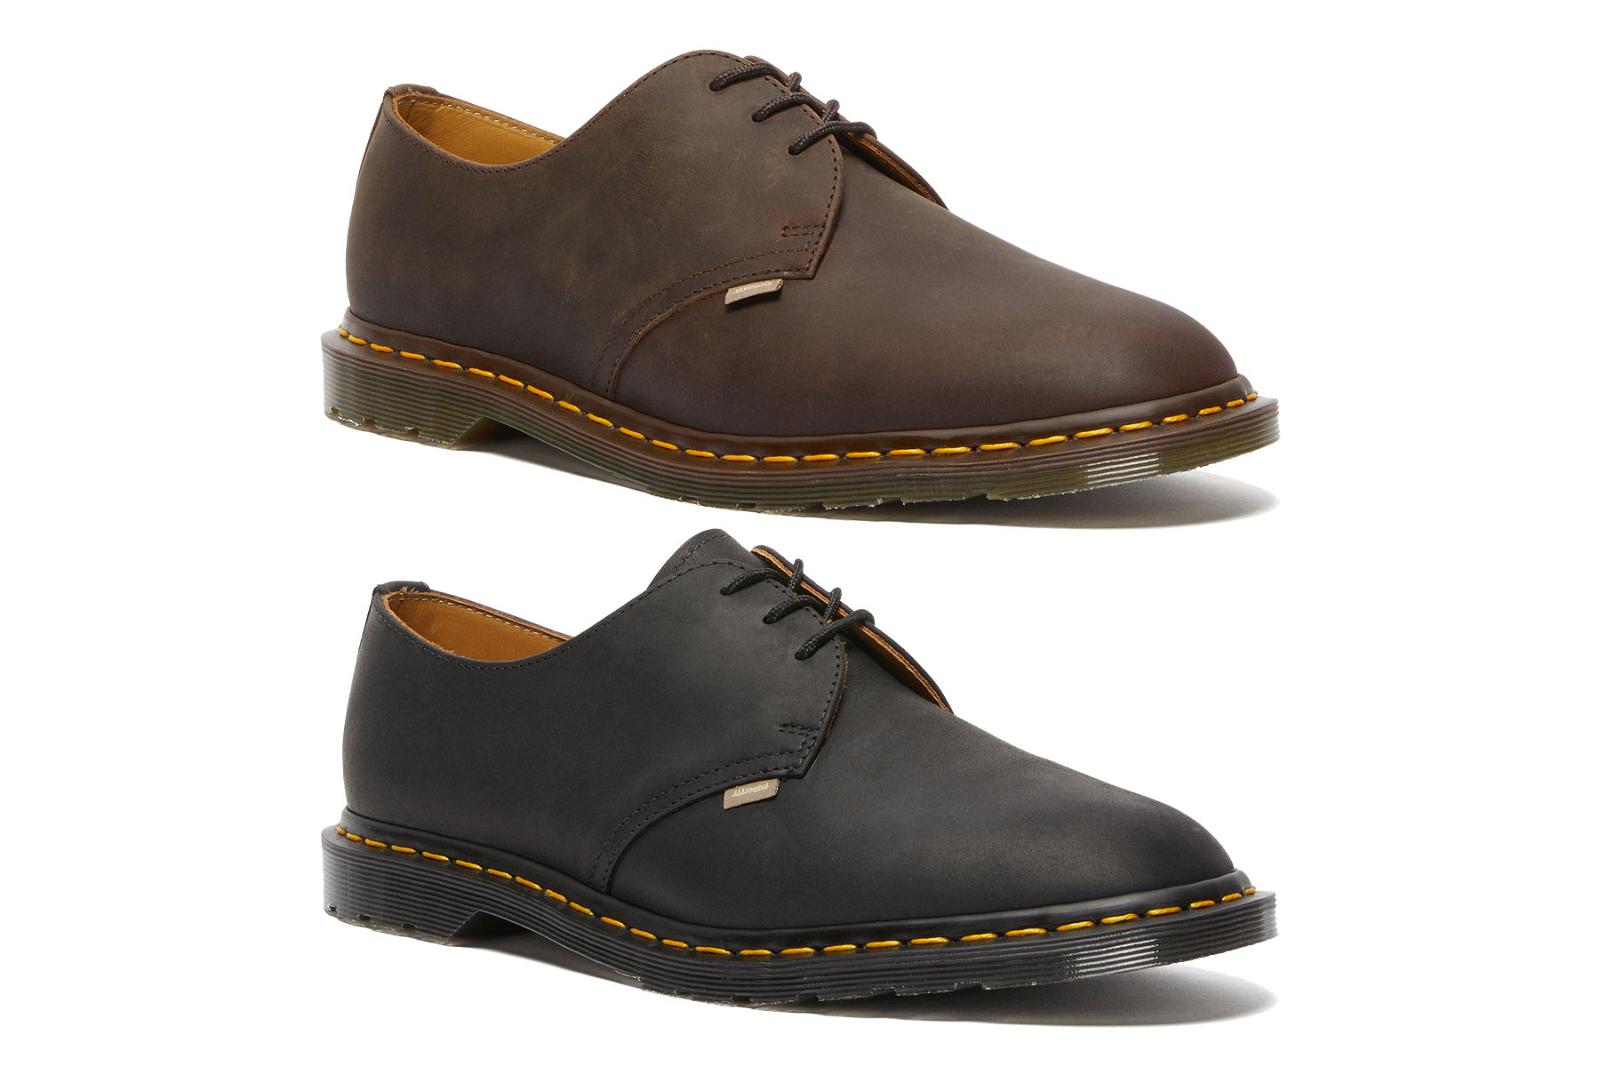 Dr. Martens x JJJJound Launch "Made In England" Shoes